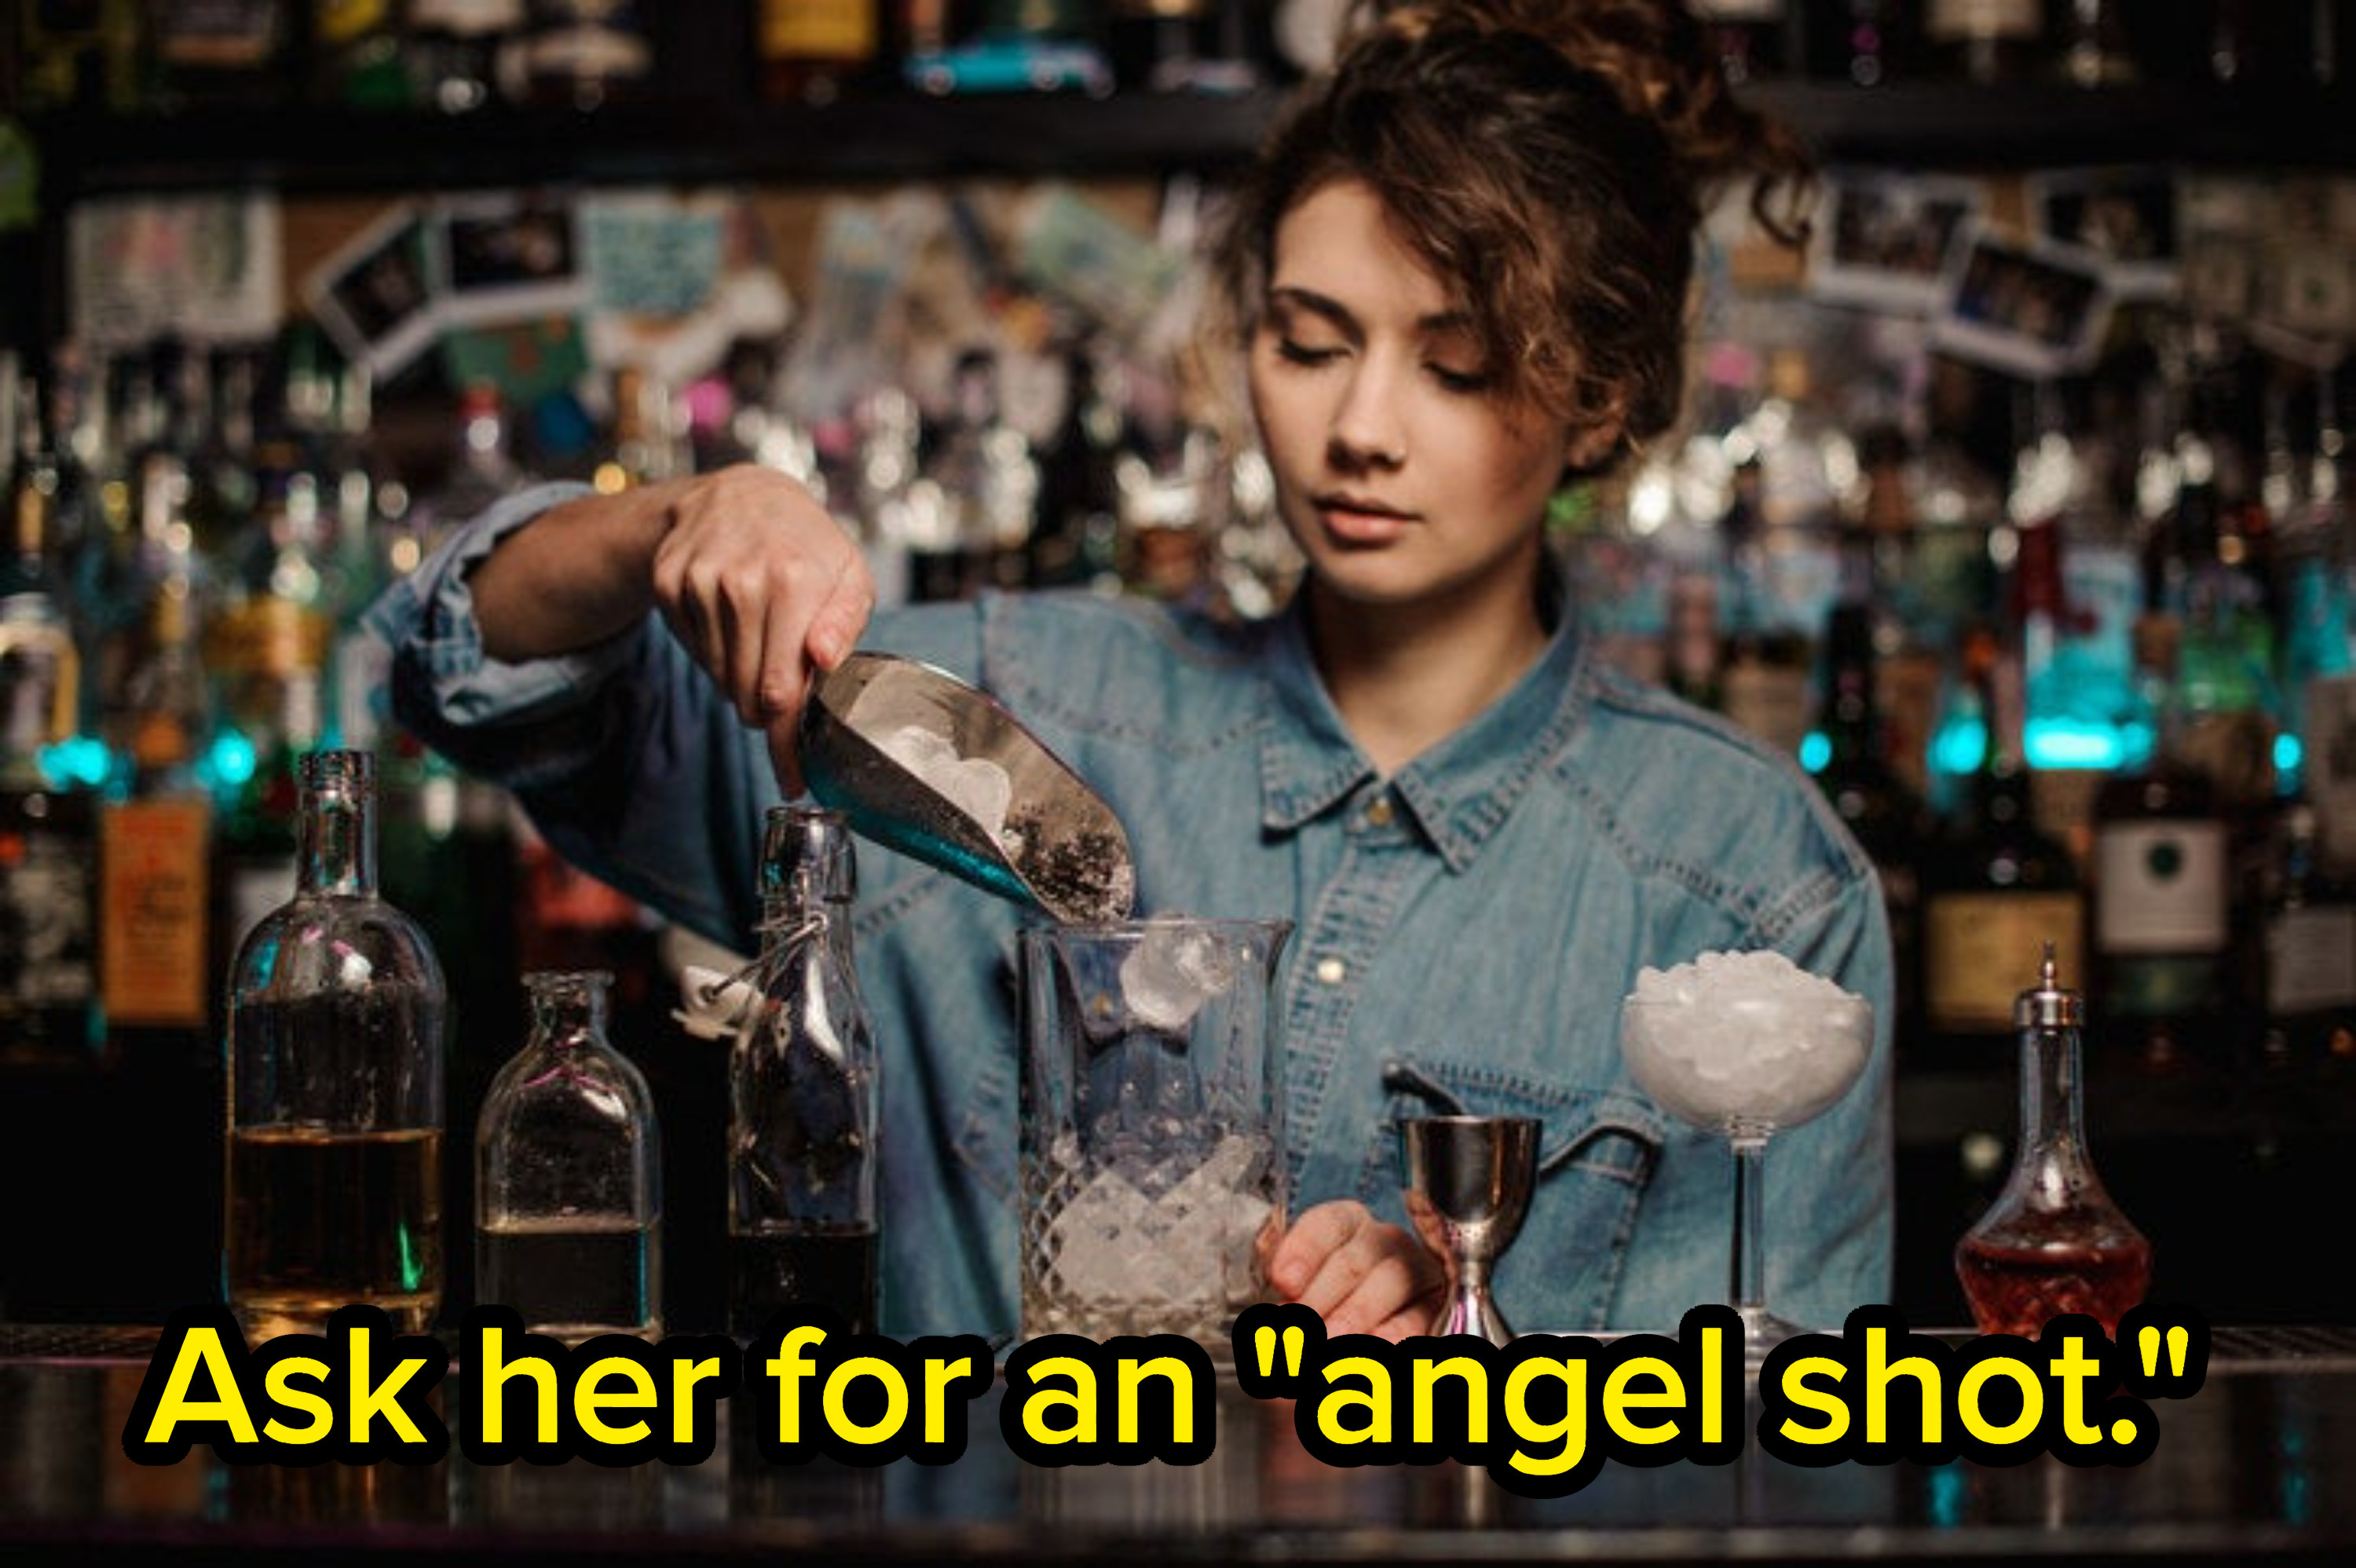 &quot;Ask her for an &#x27;angel shot.&#x27;&quot;